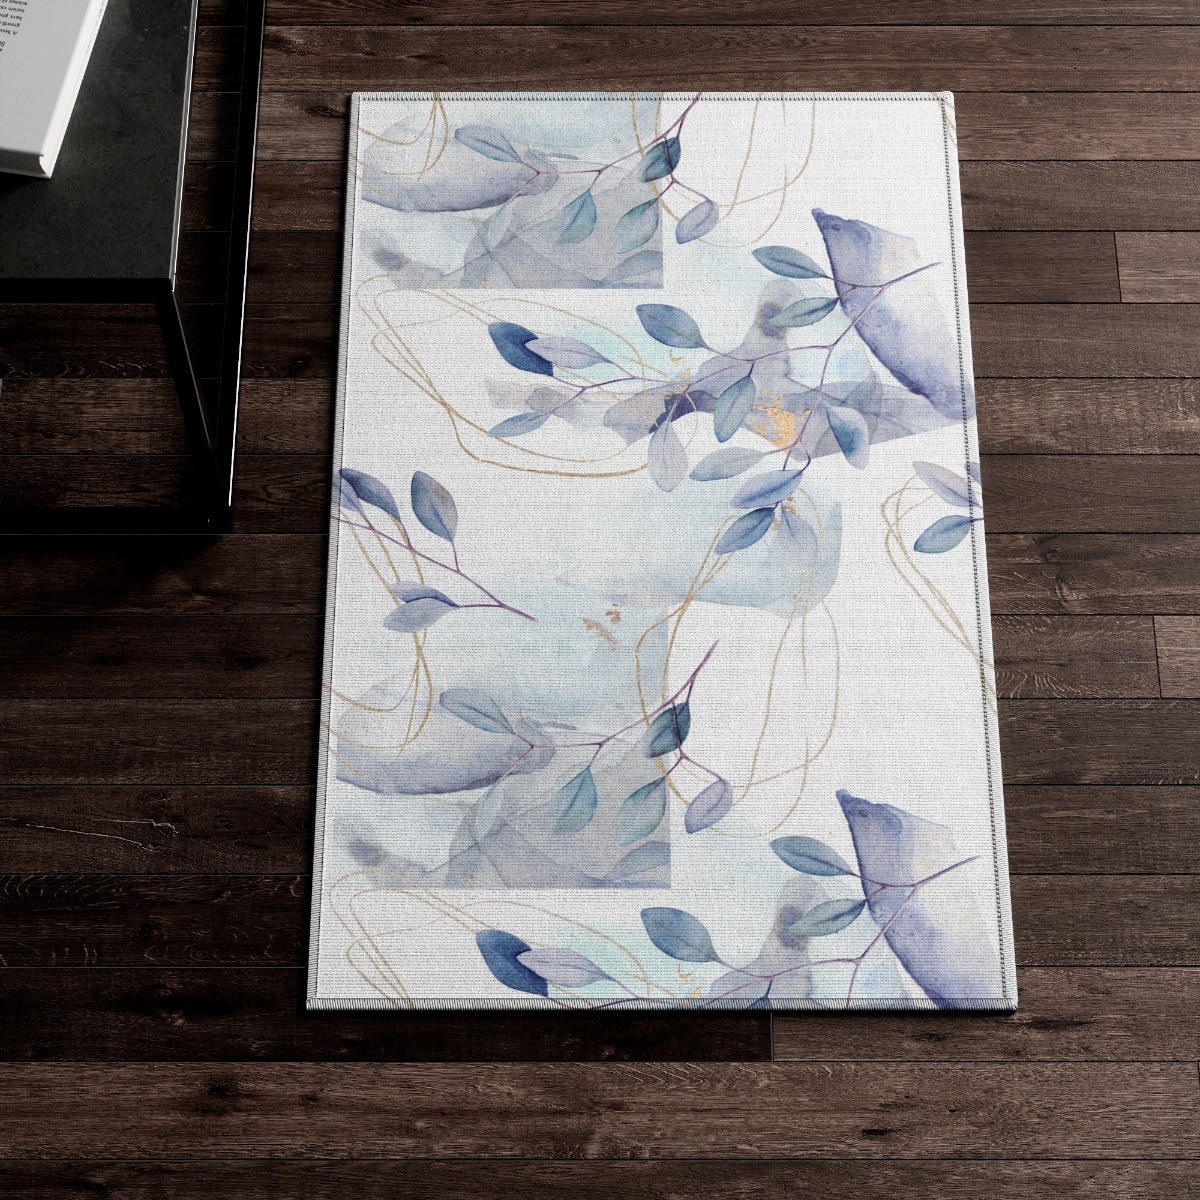 Abstract Floral Branches Indoor Rug